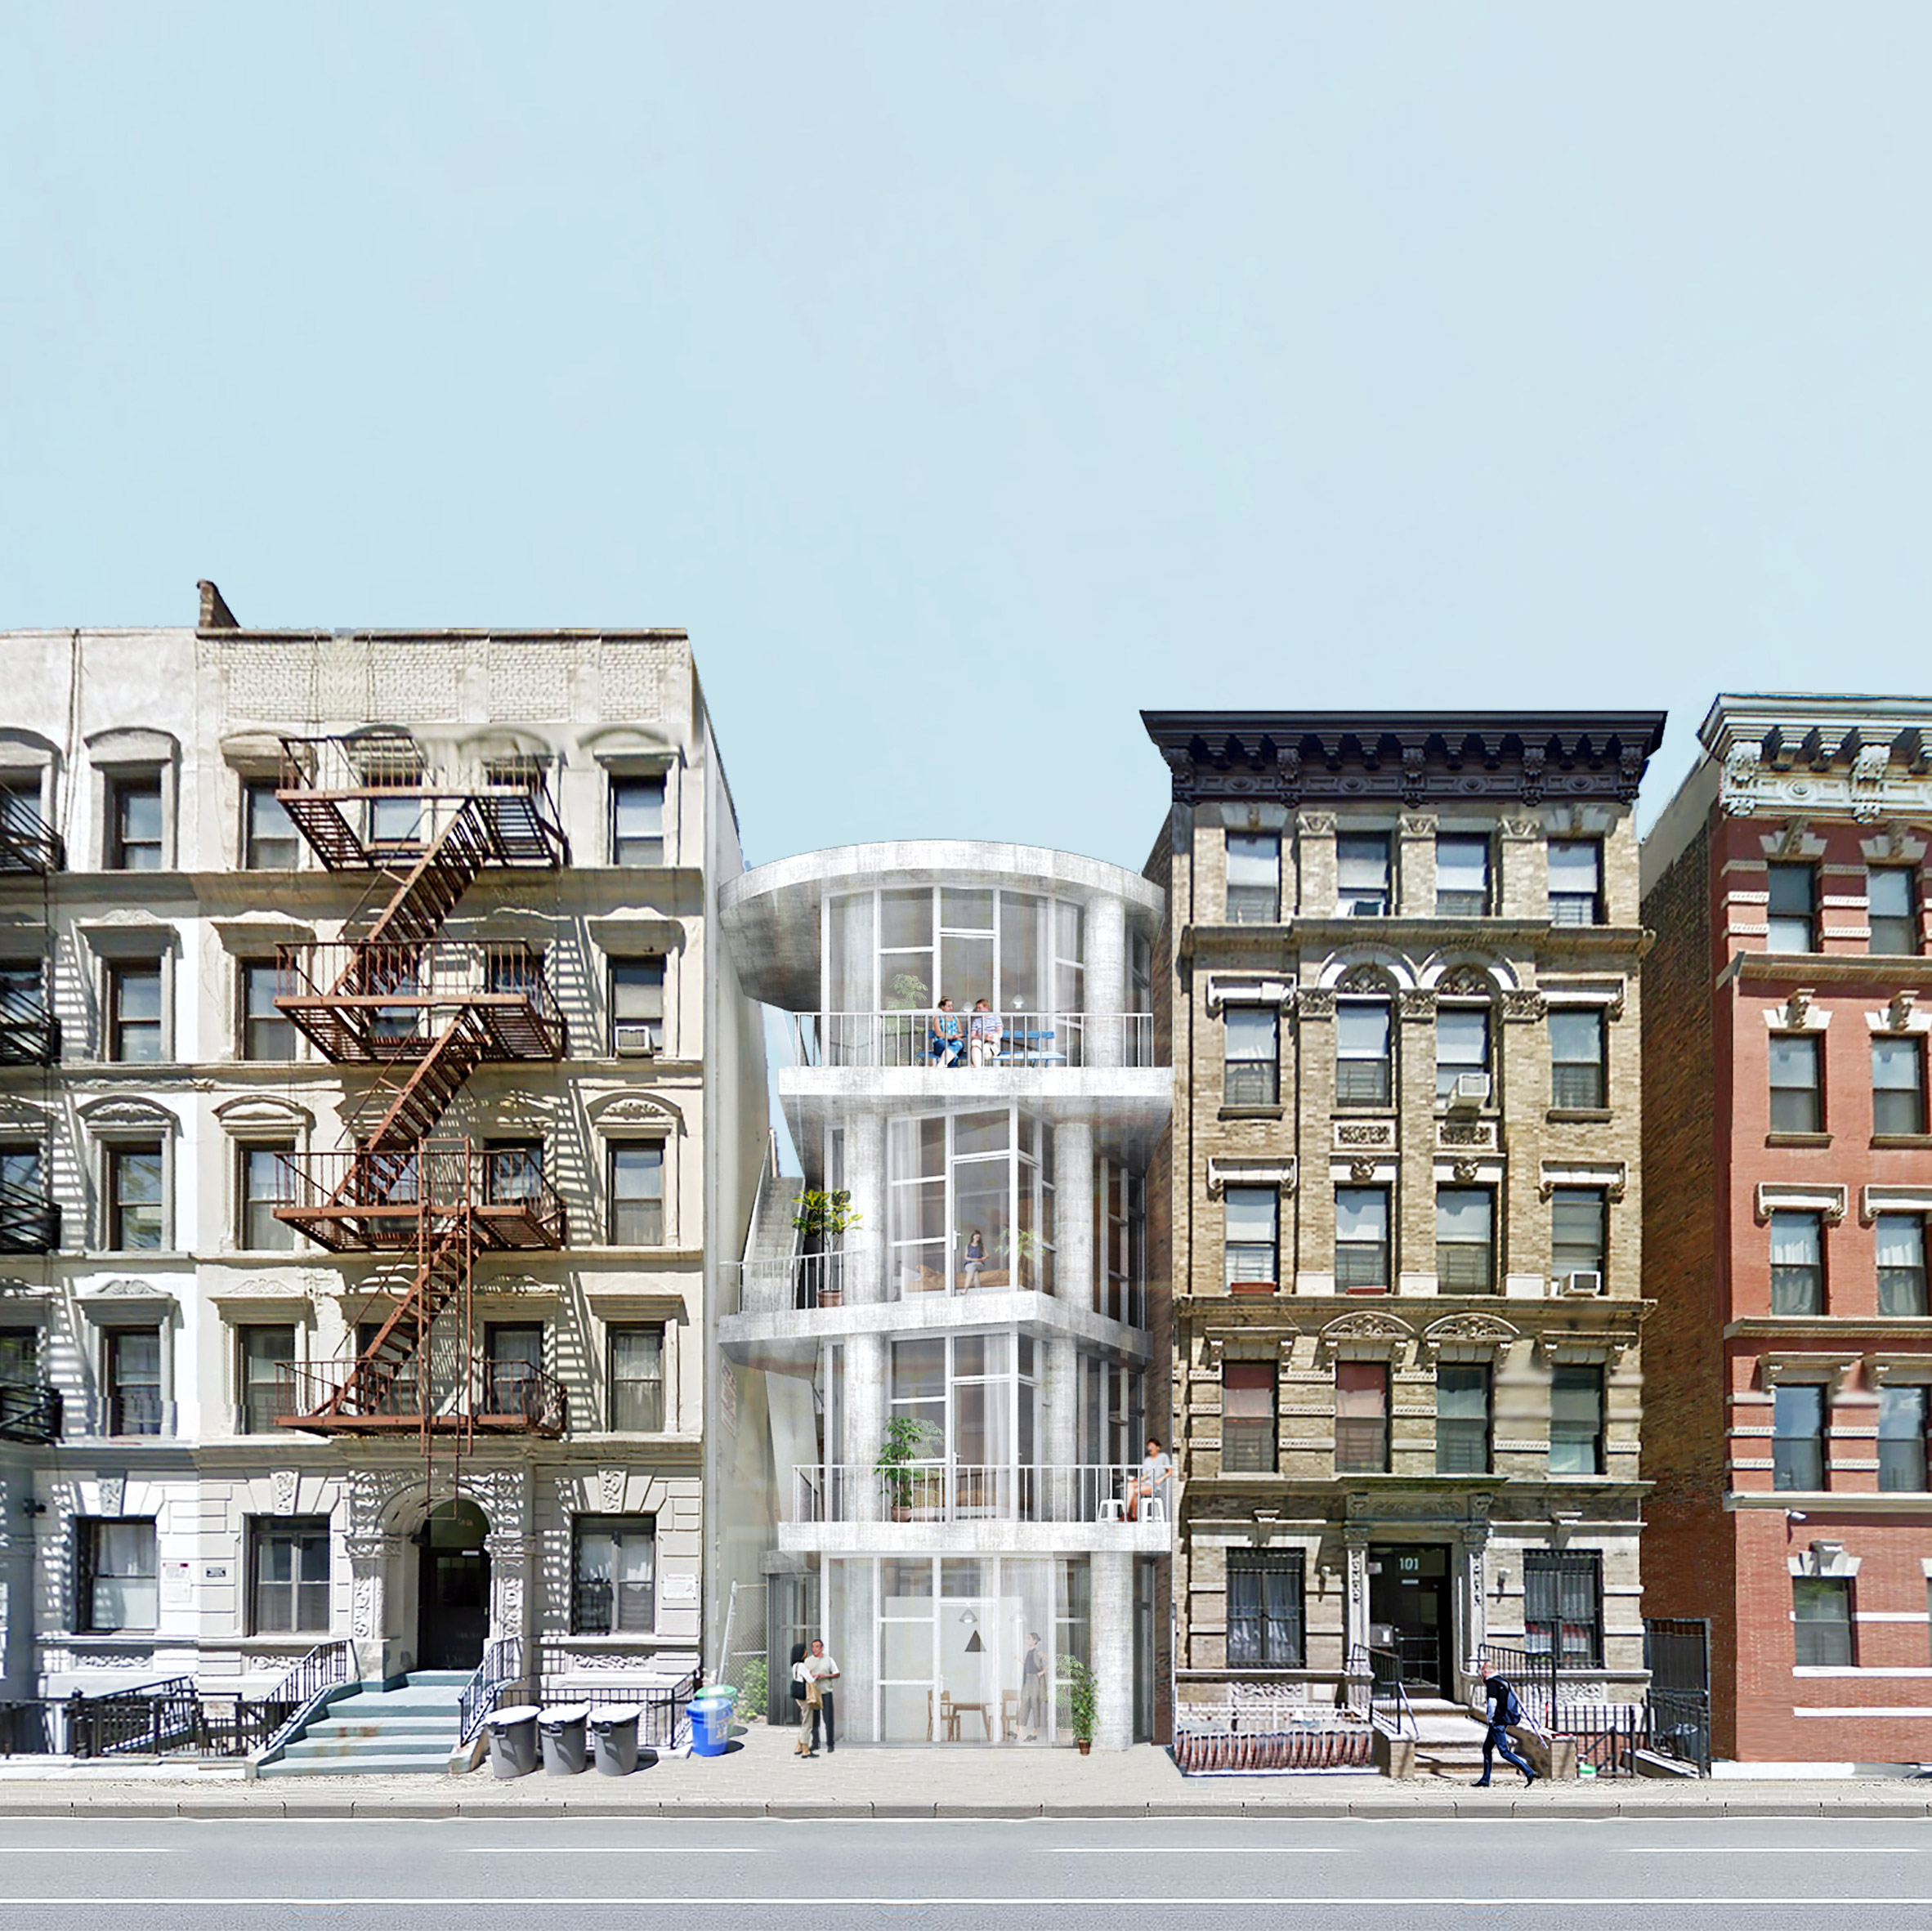 Table Top Apartments designed to "alleviate social isolation" in New York